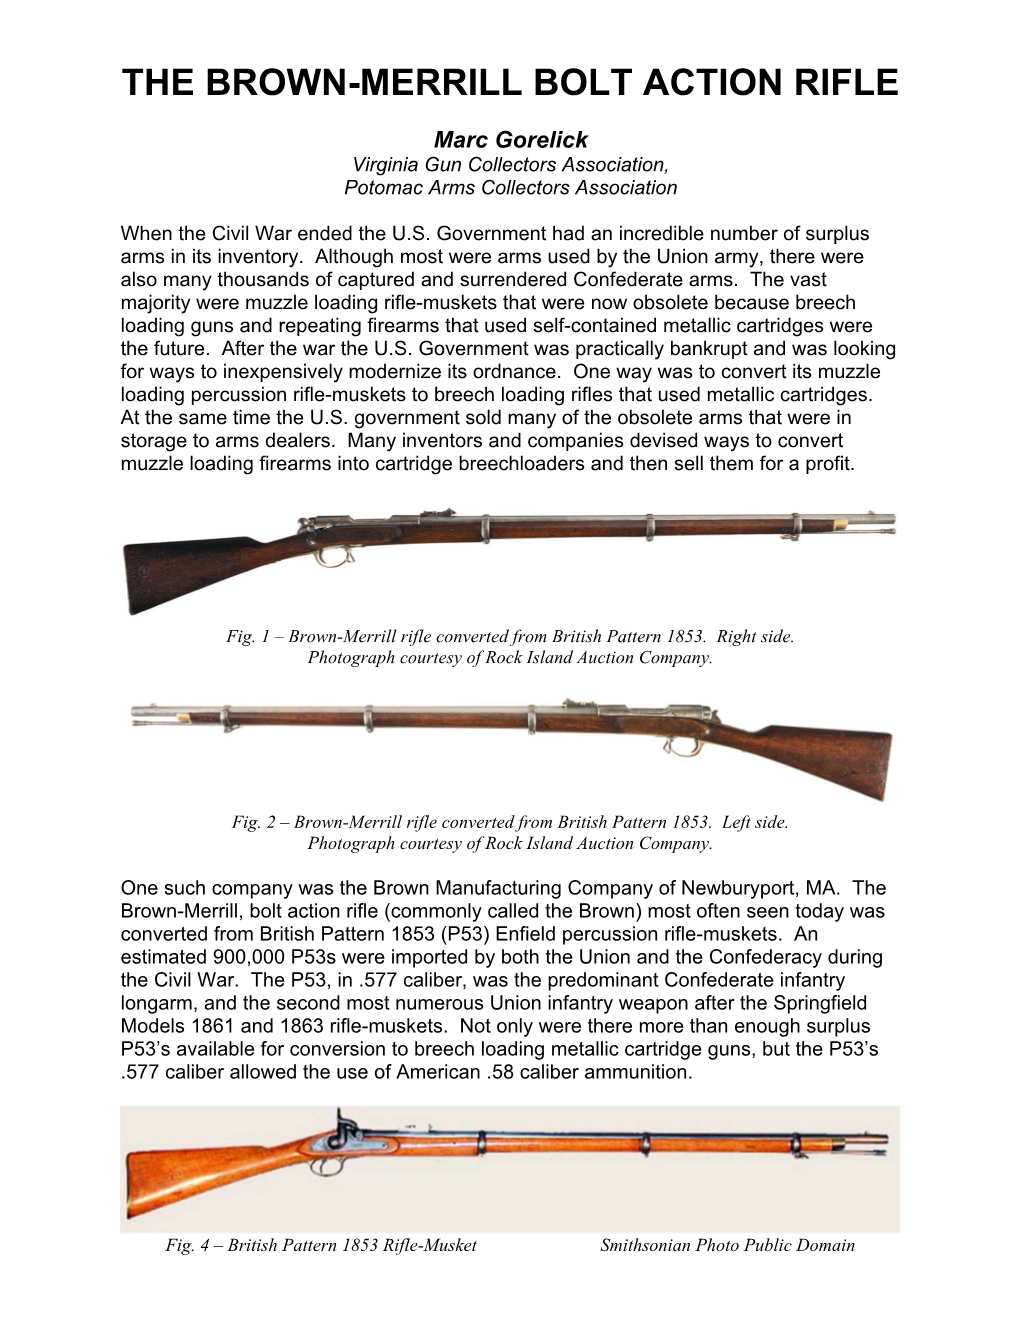 The Brown-Merrill Bolt Action Rifle